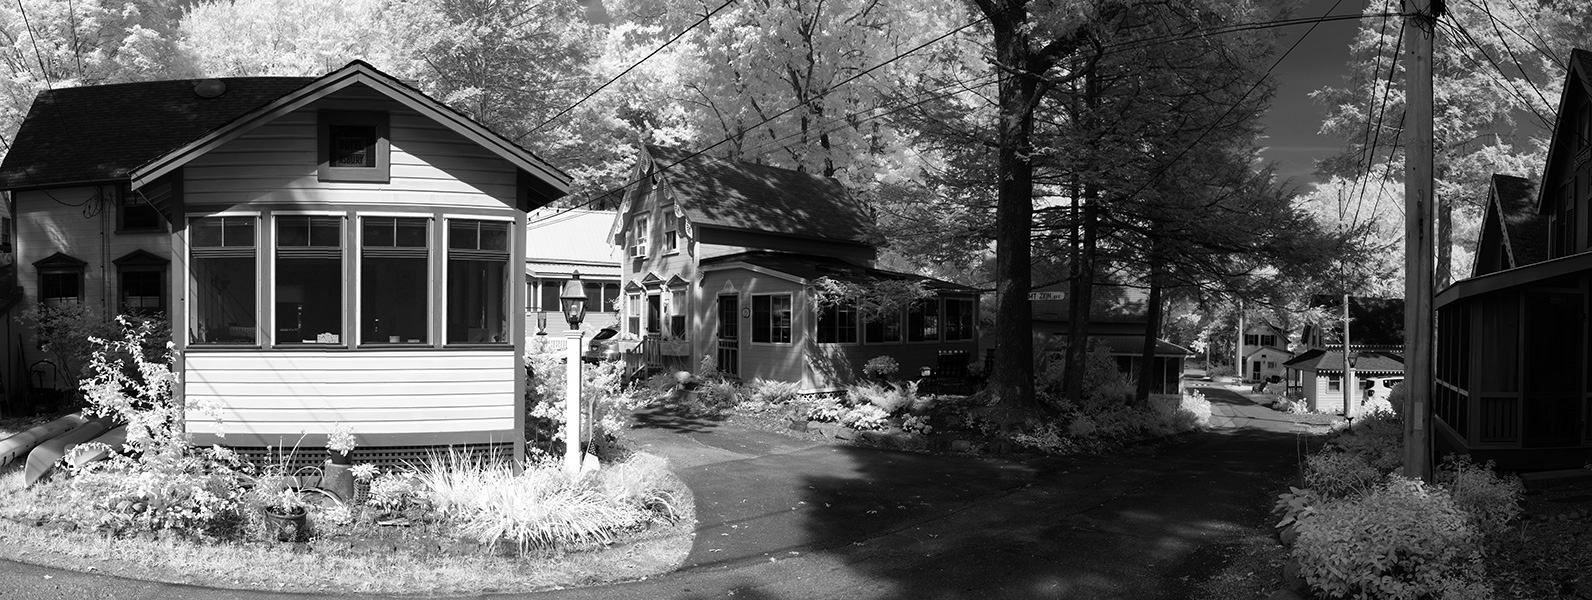 Infrared Panorama of Small Rustic Houses and Streets in a Forest.